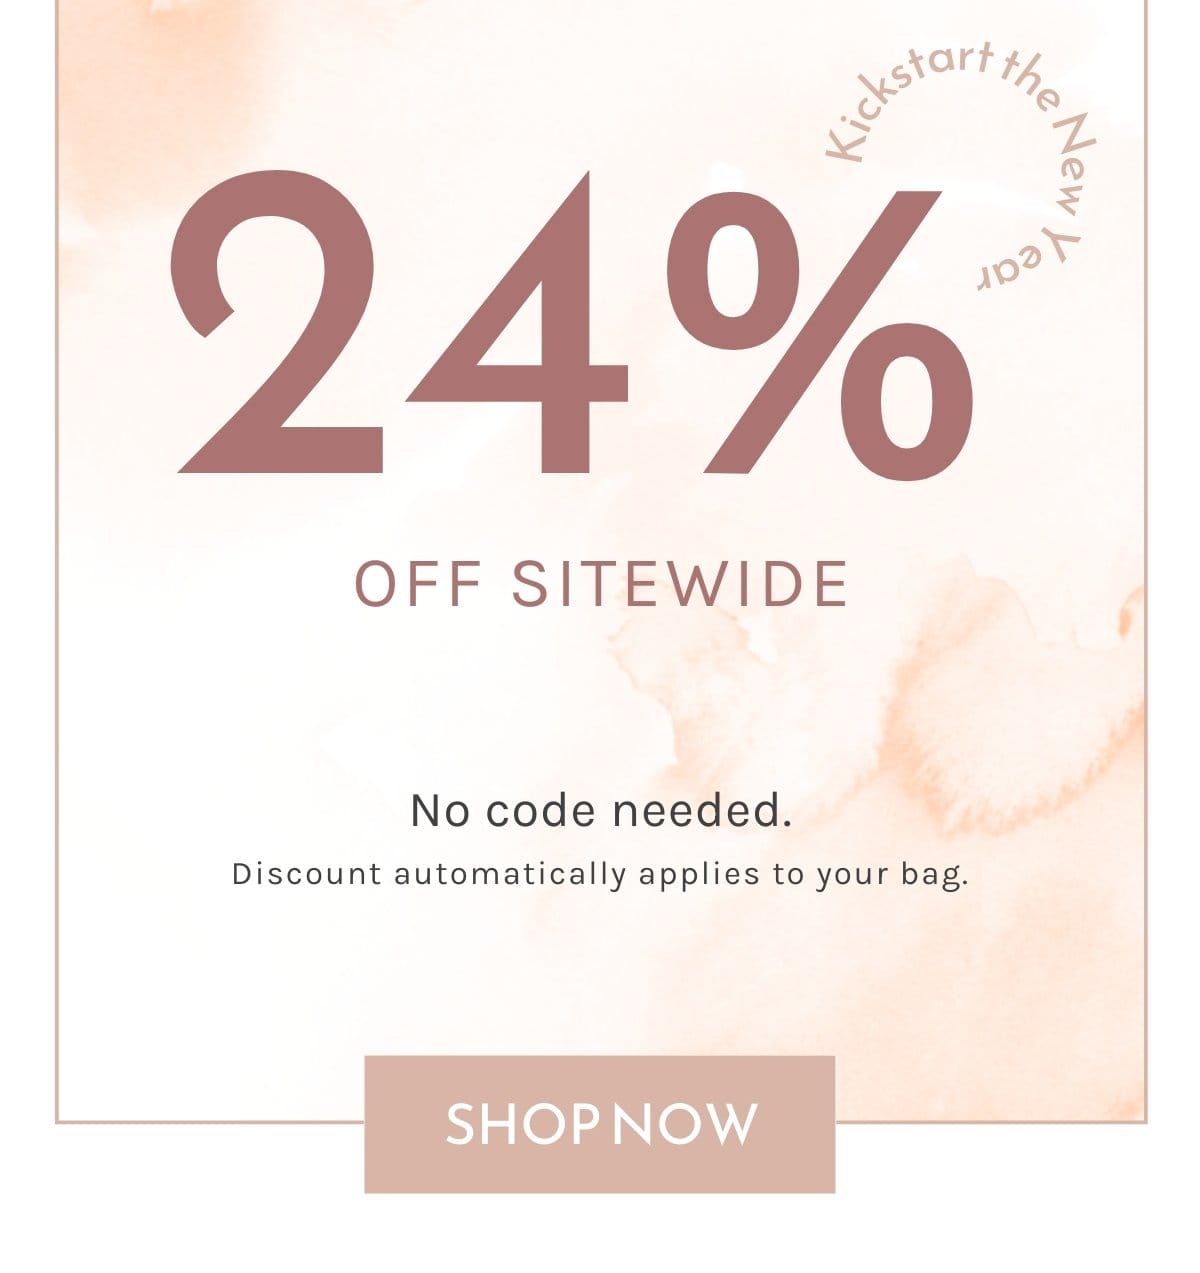 24% Off Sitewide. No code needed. Discount automatically applies to your bag. | SHOP NOW,